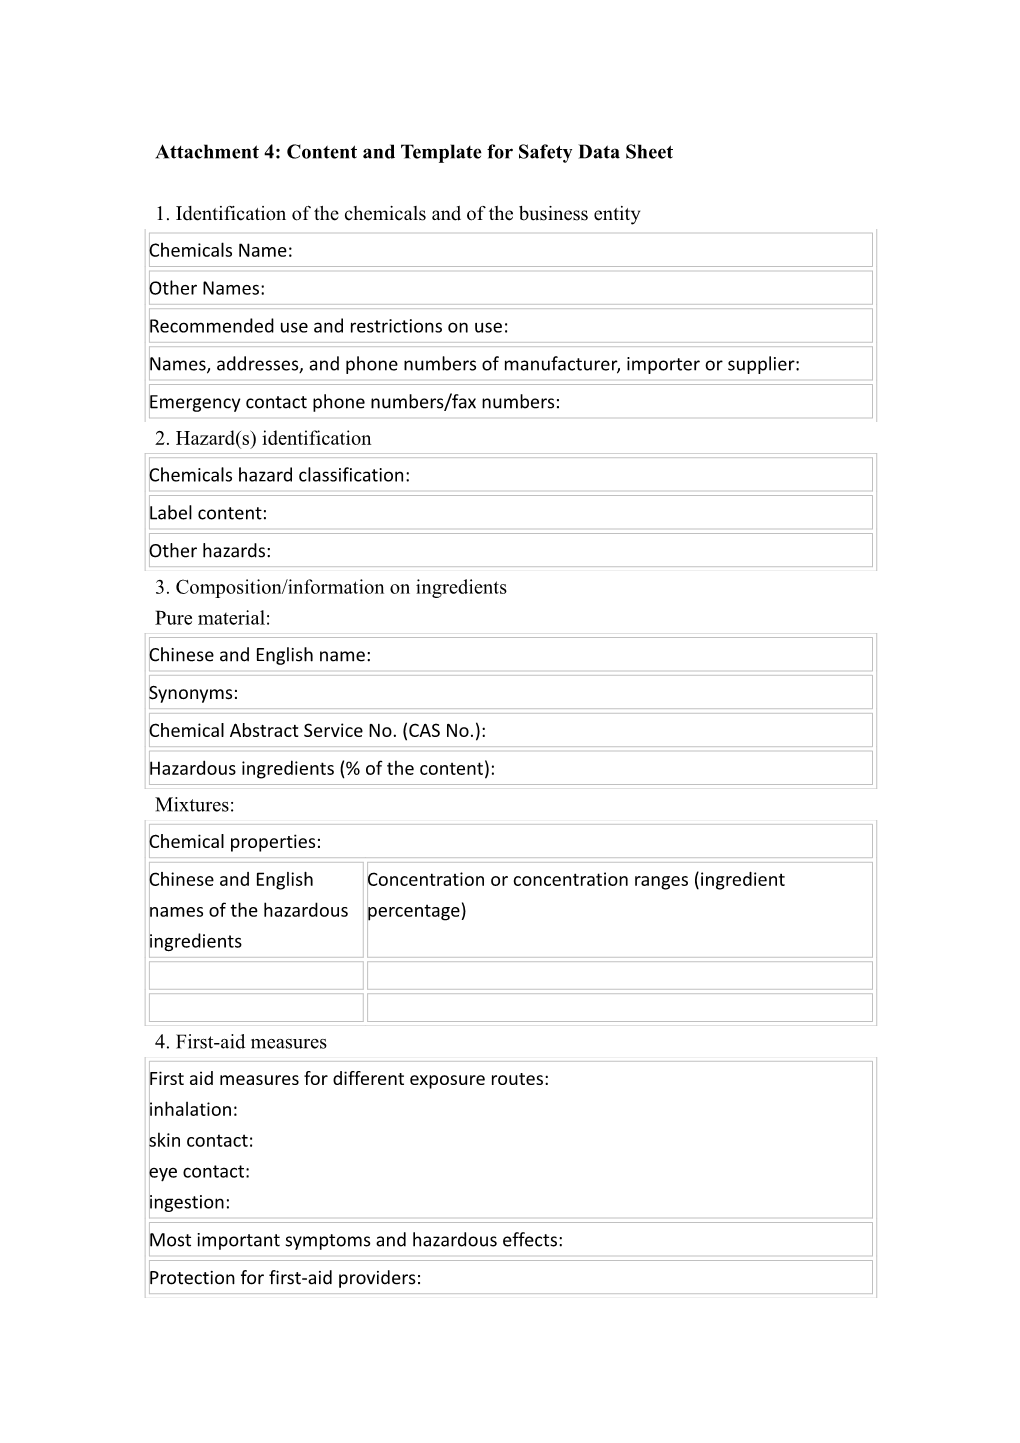 Attachment4: Content and Template for Safety Data Sheet